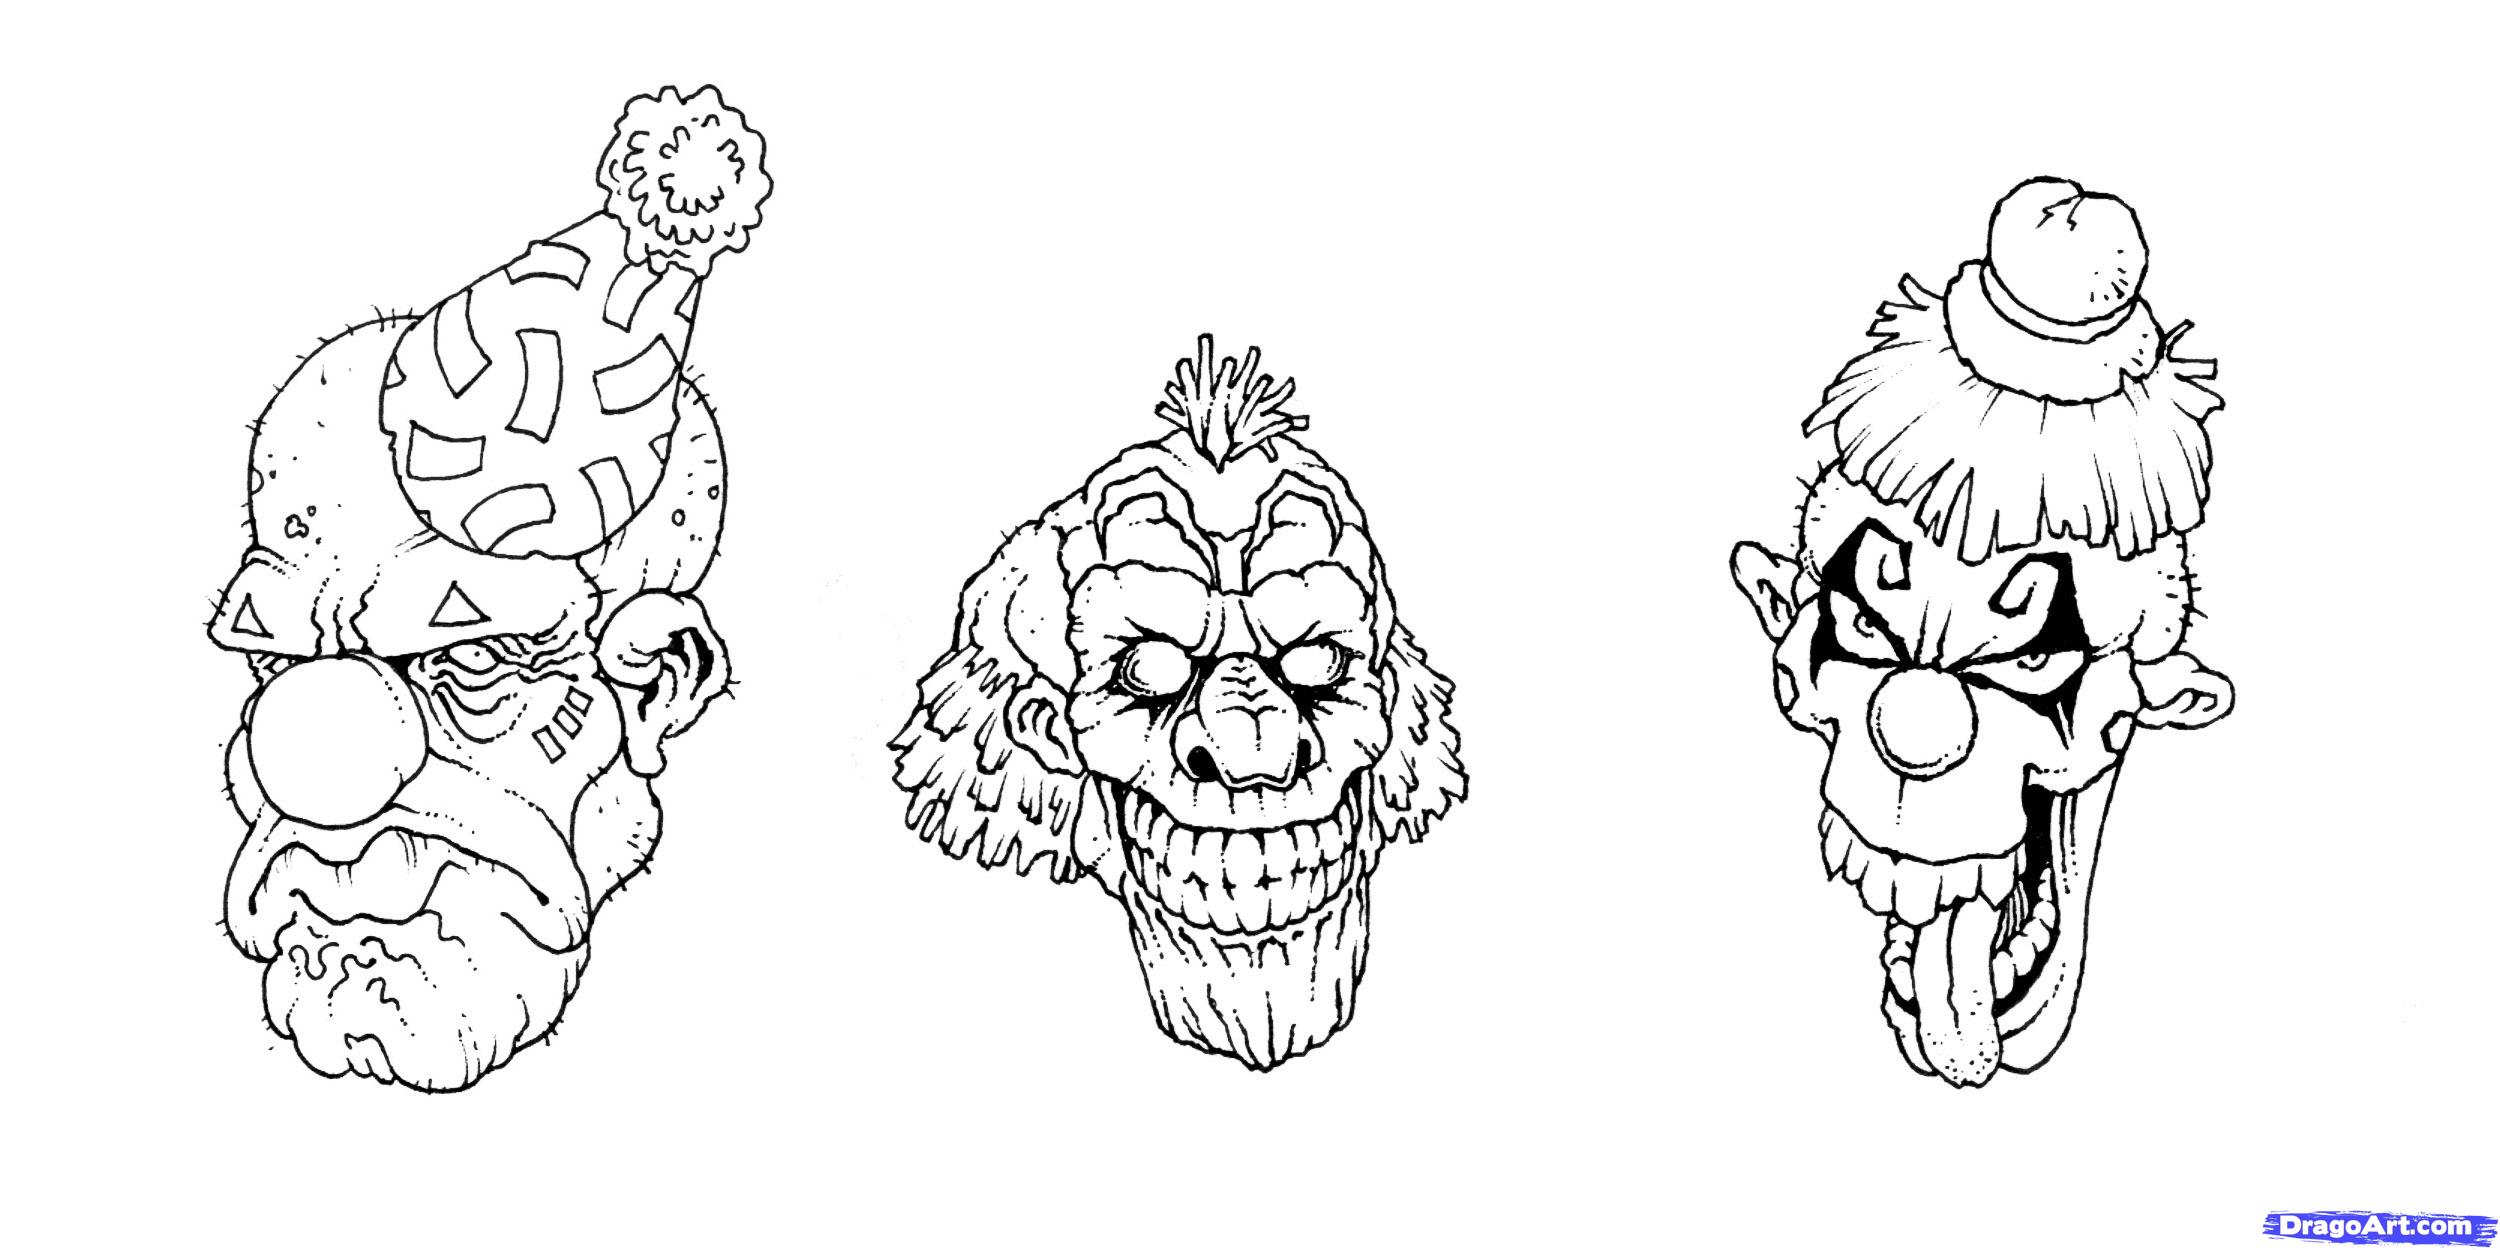 2500x1250 easy way to draw scary clowns - Cool Clown Drawings.